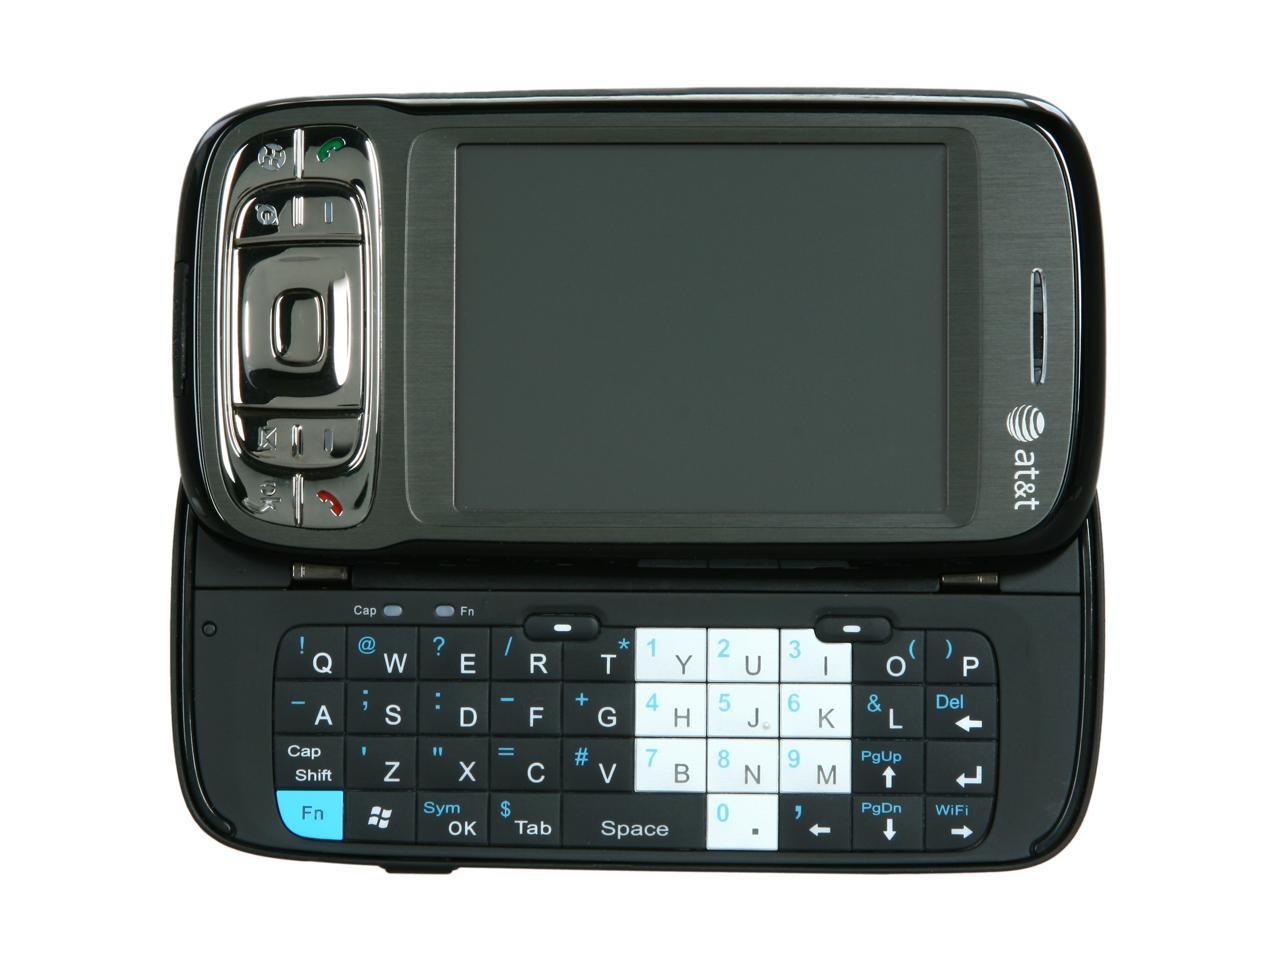 HTC Tilt Unlocked GSM Smart Phone with Full QWERTY Keyboard (8900